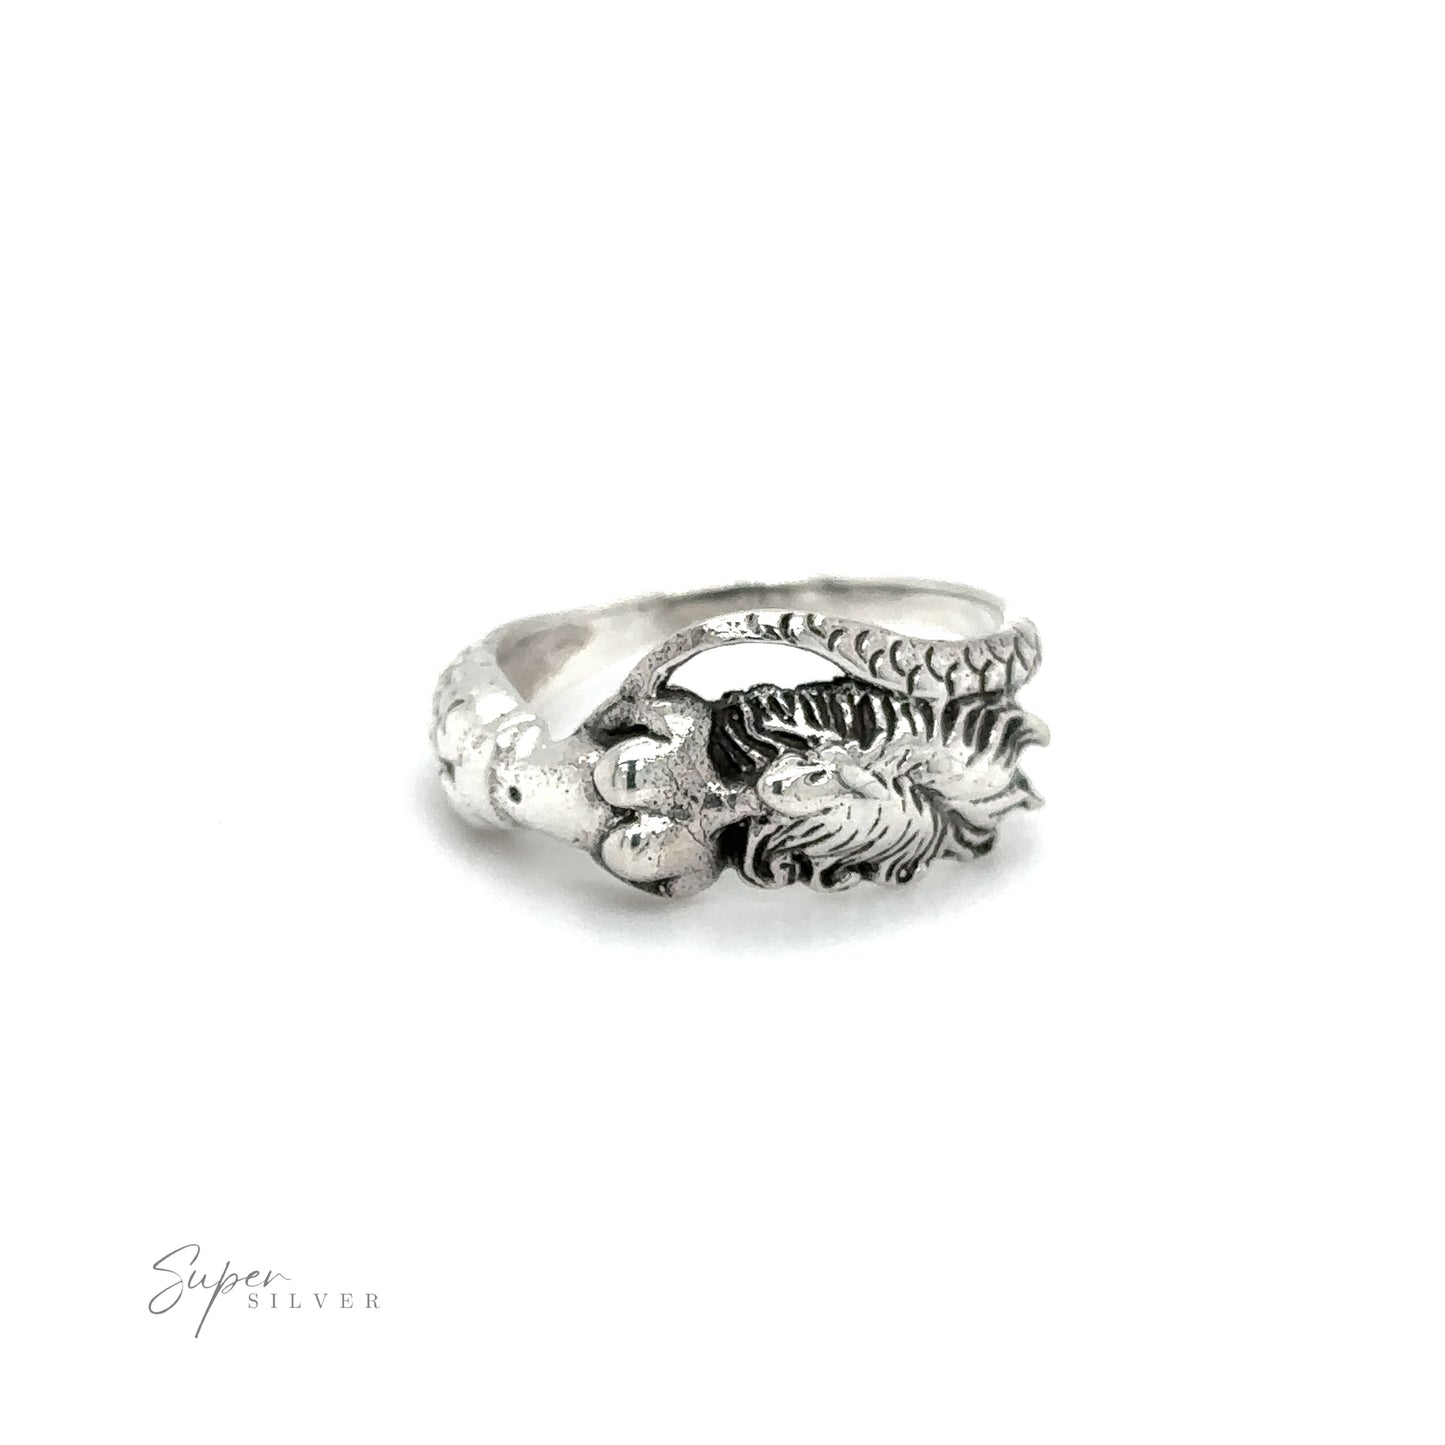 A Mermaid Ring with Swirly Tail adorned with a delicate flower design, reminiscent of the enchanting ocean and mermaids.